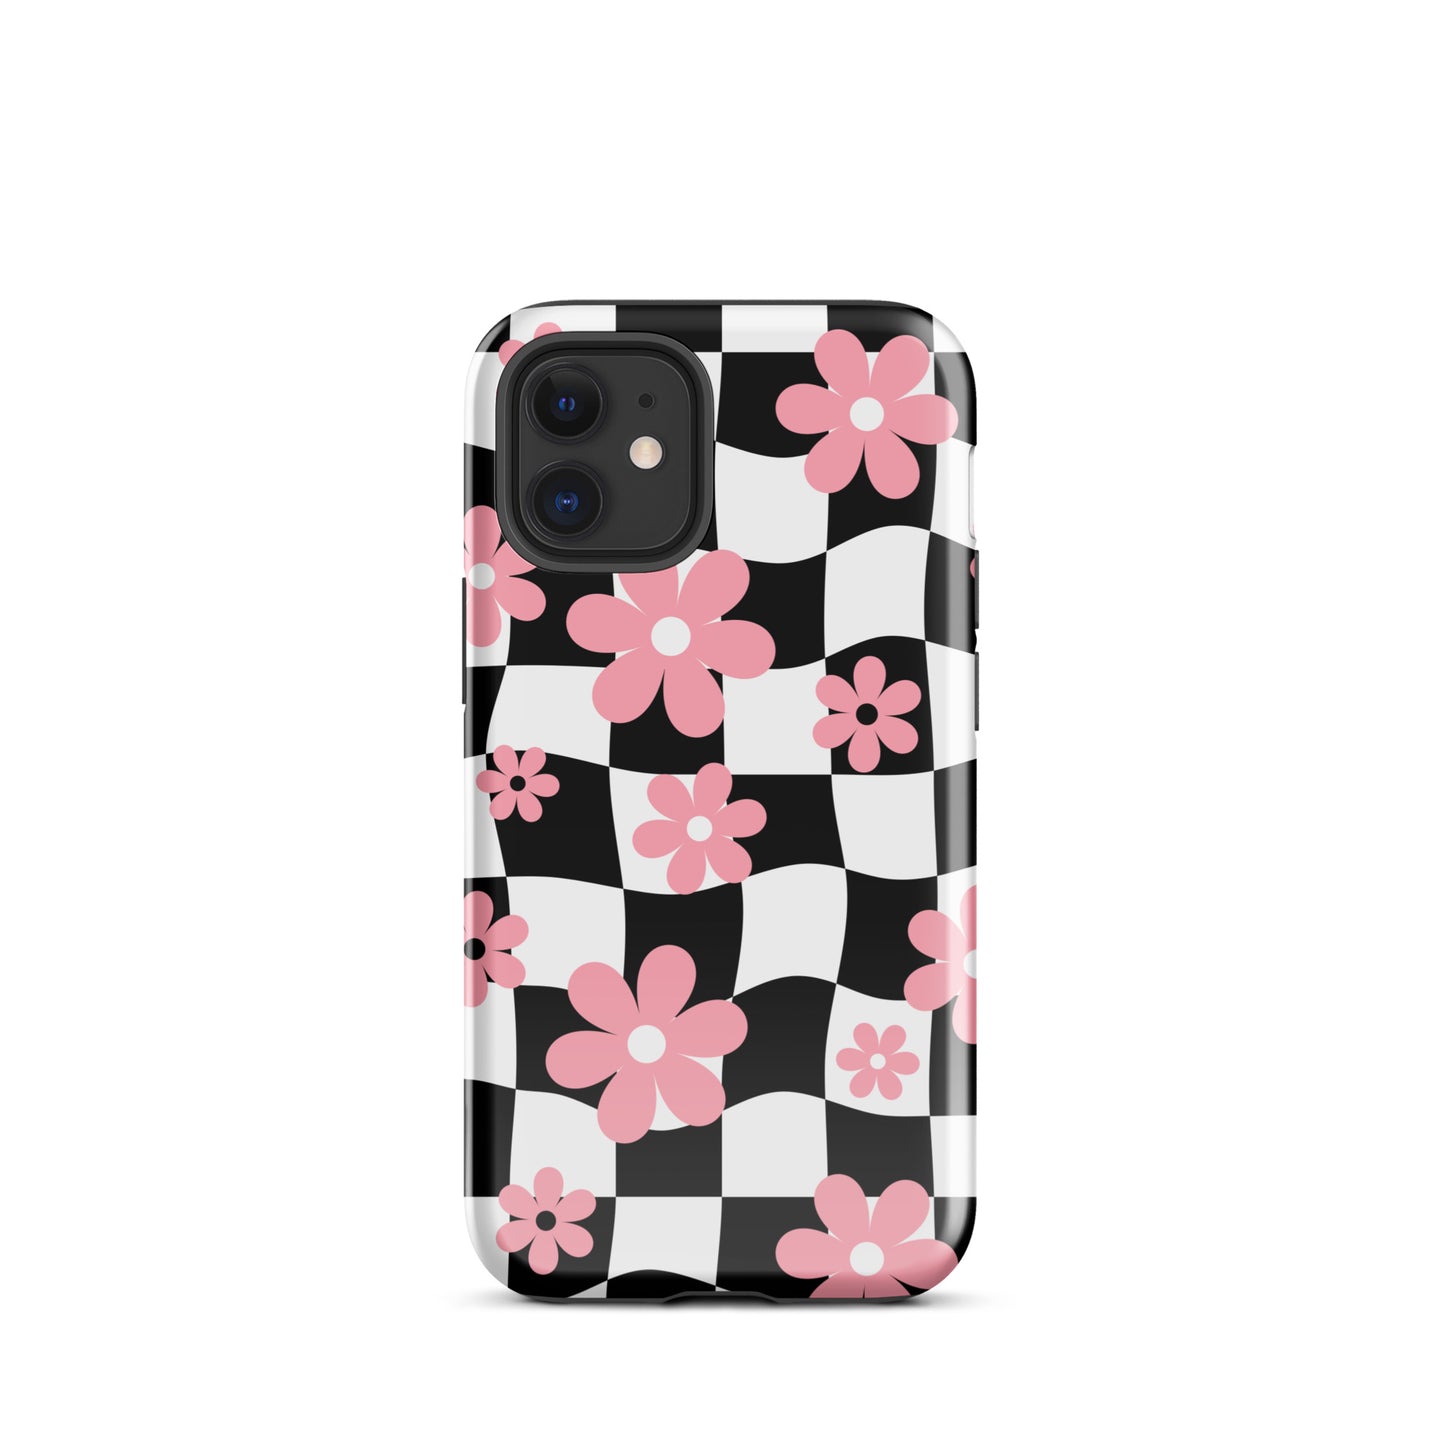 Floral Wavy Checkered iPhone Case iPhone 12 mini Glossy